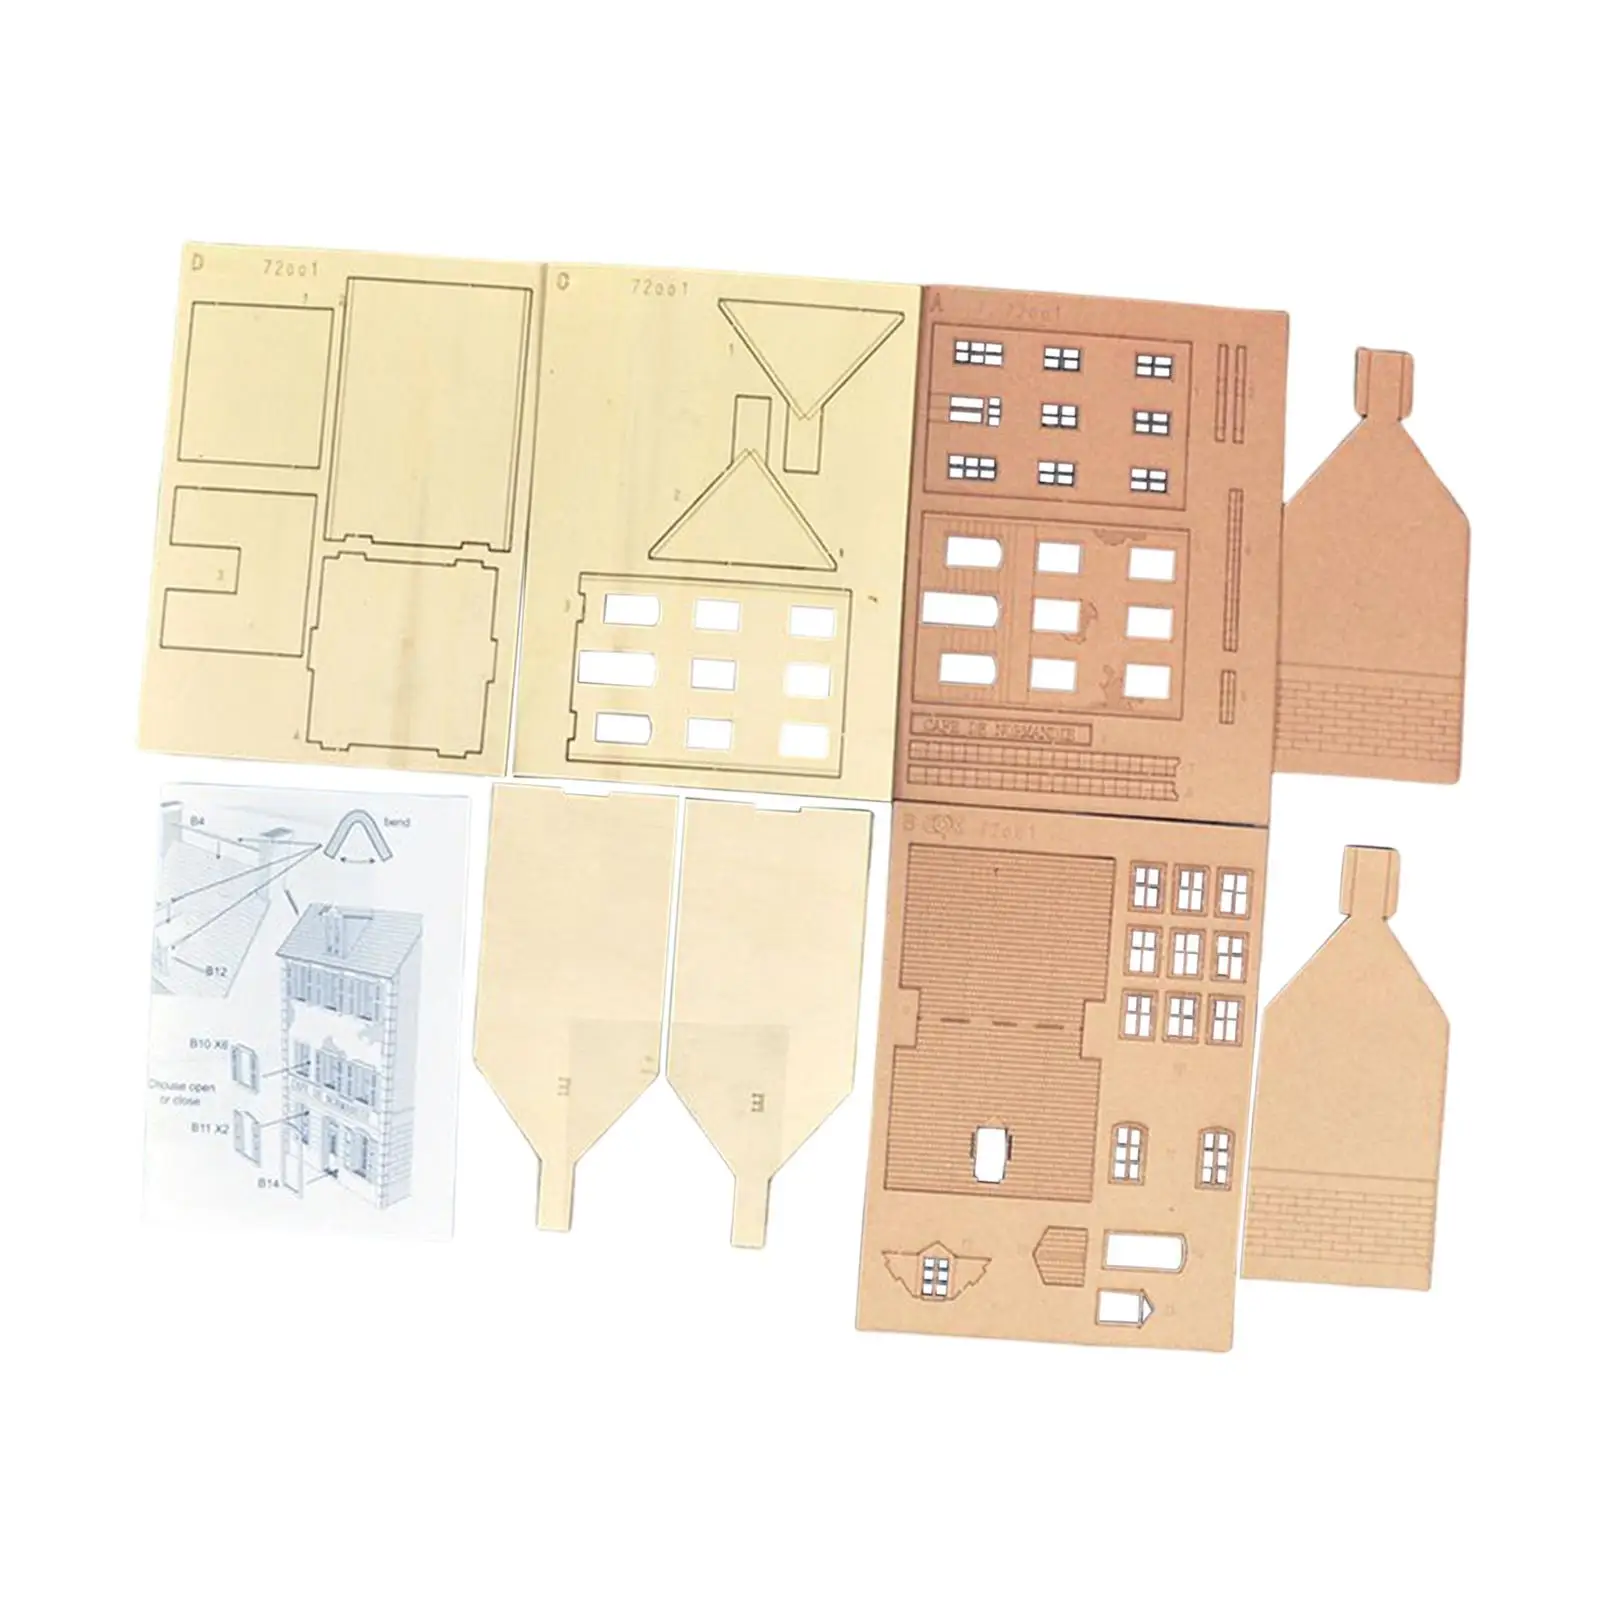 3D Wooden Puzzle Miniature Model House kits for Scenery Layout Home Decor